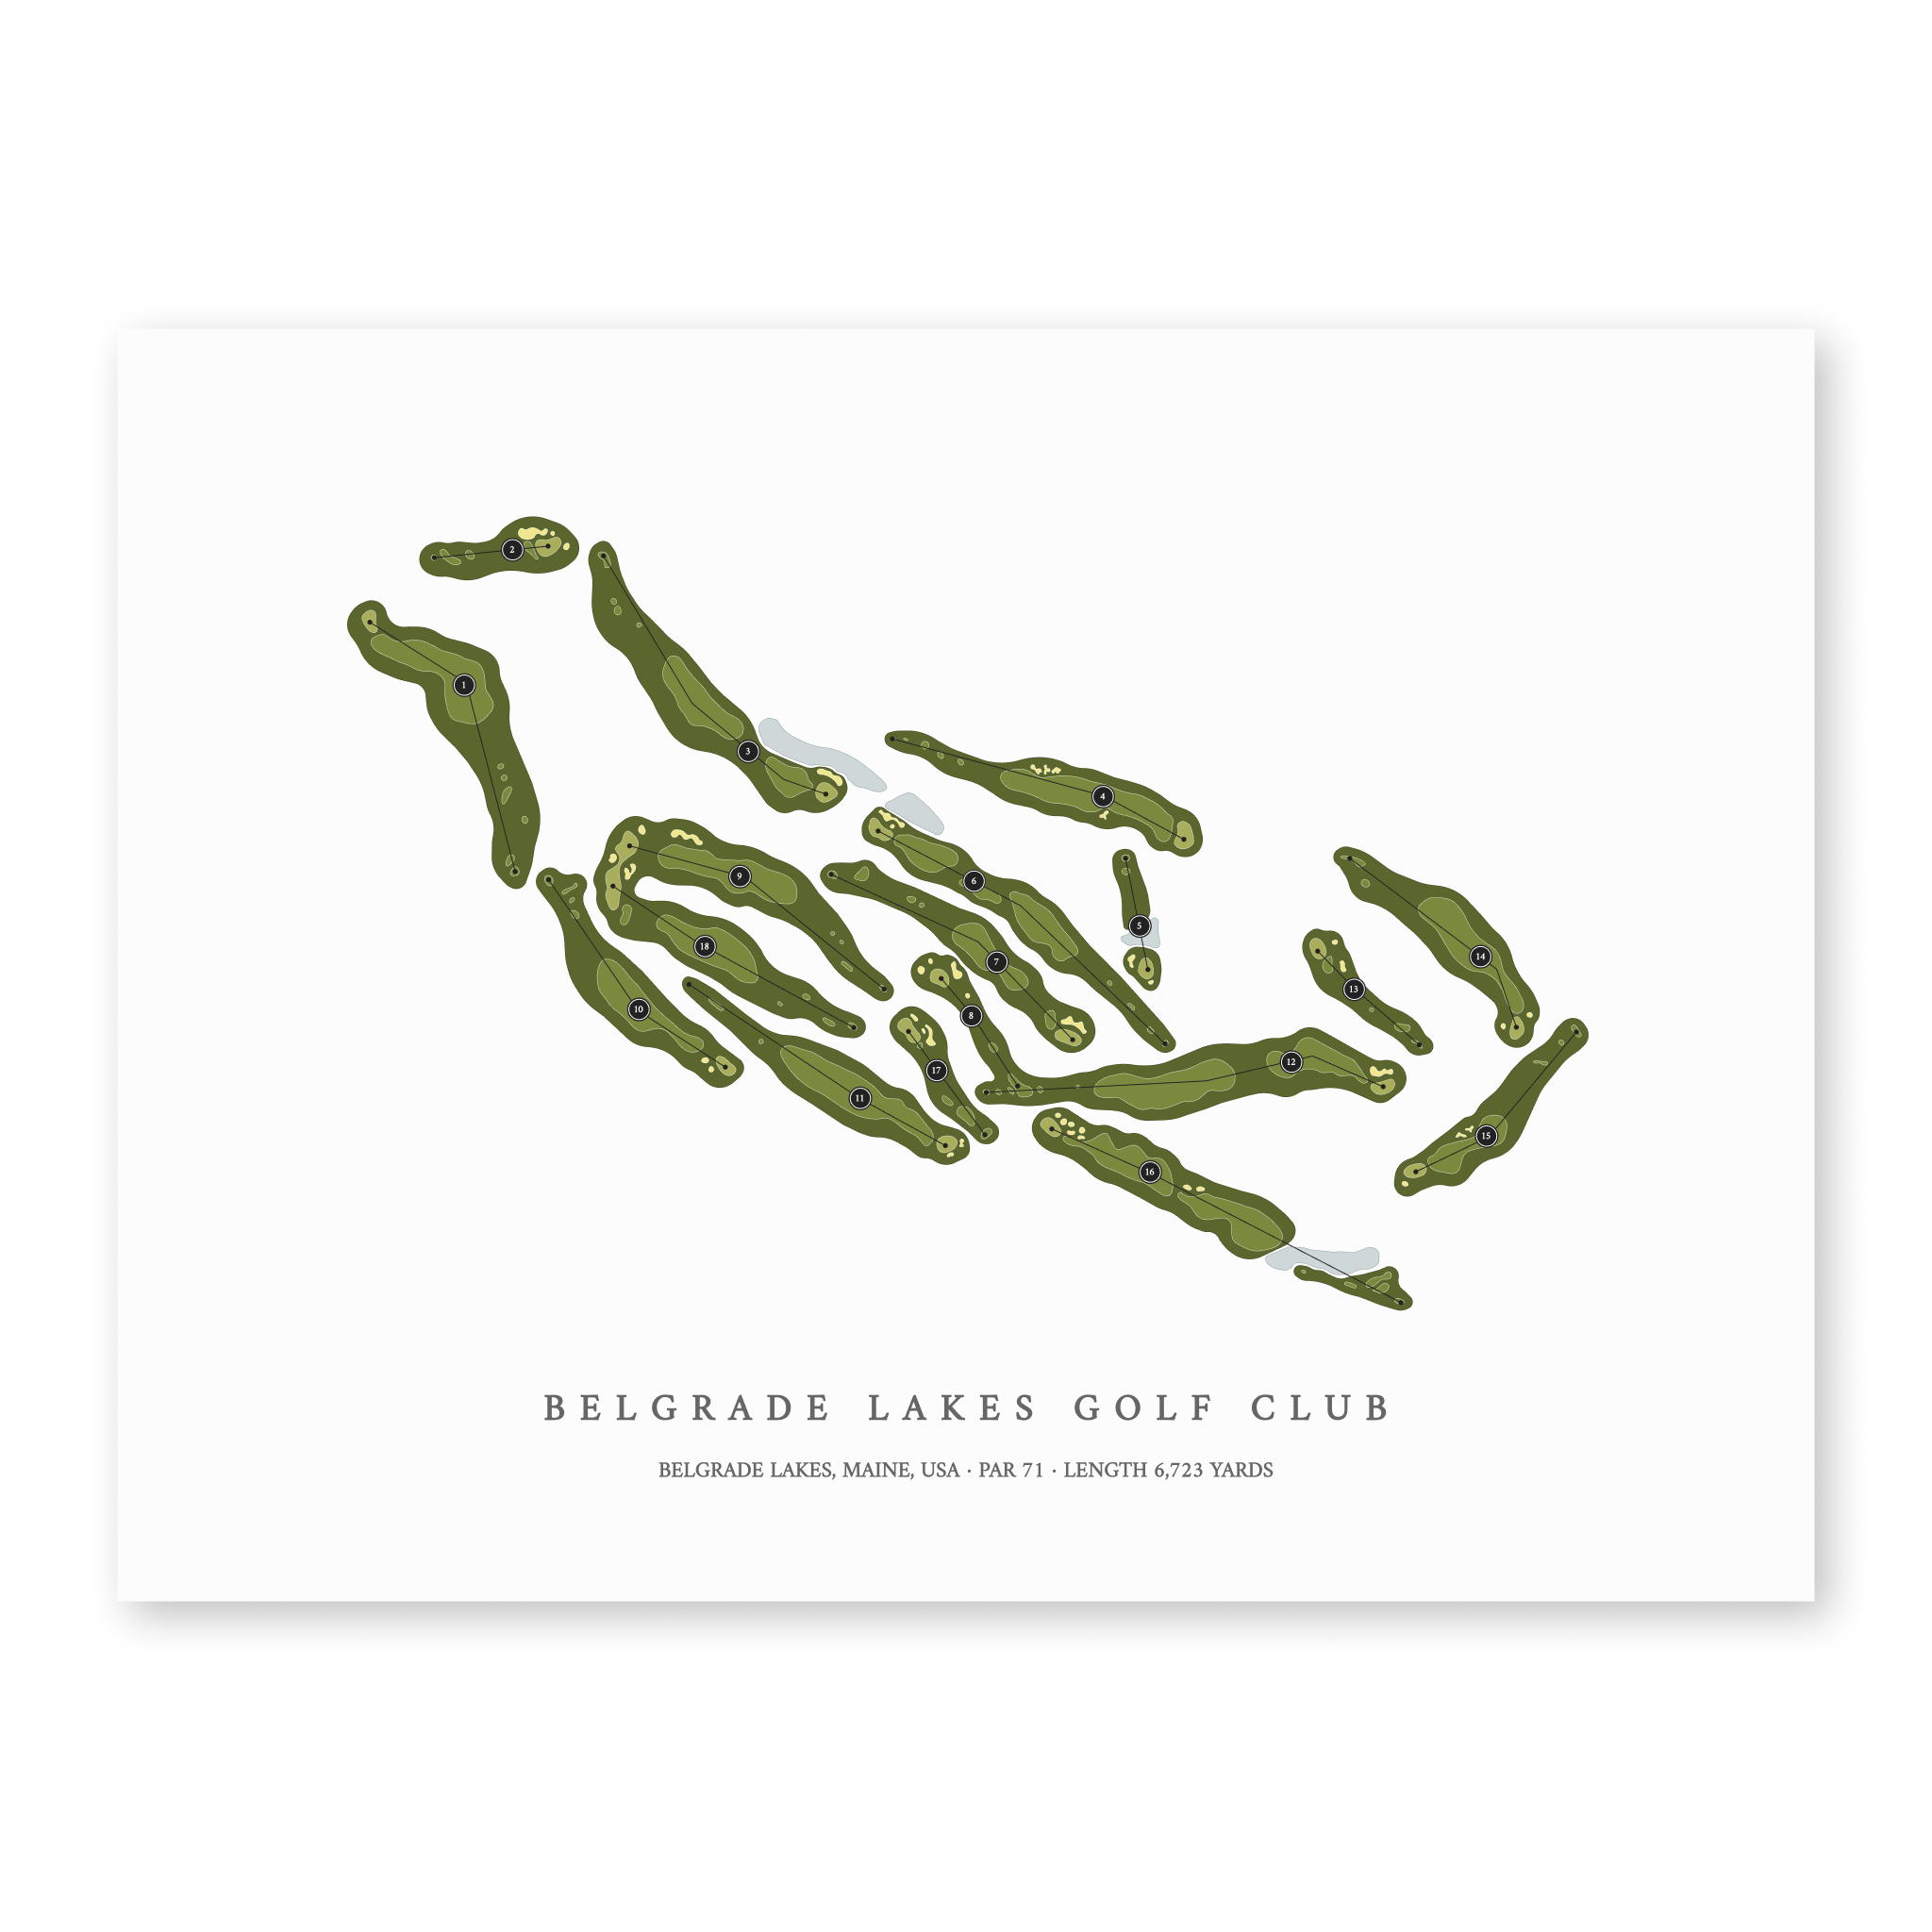 Belgrade Lakes Golf Club| Golf Course Print | Unframed With Hole Numbers #hole numbers_yes